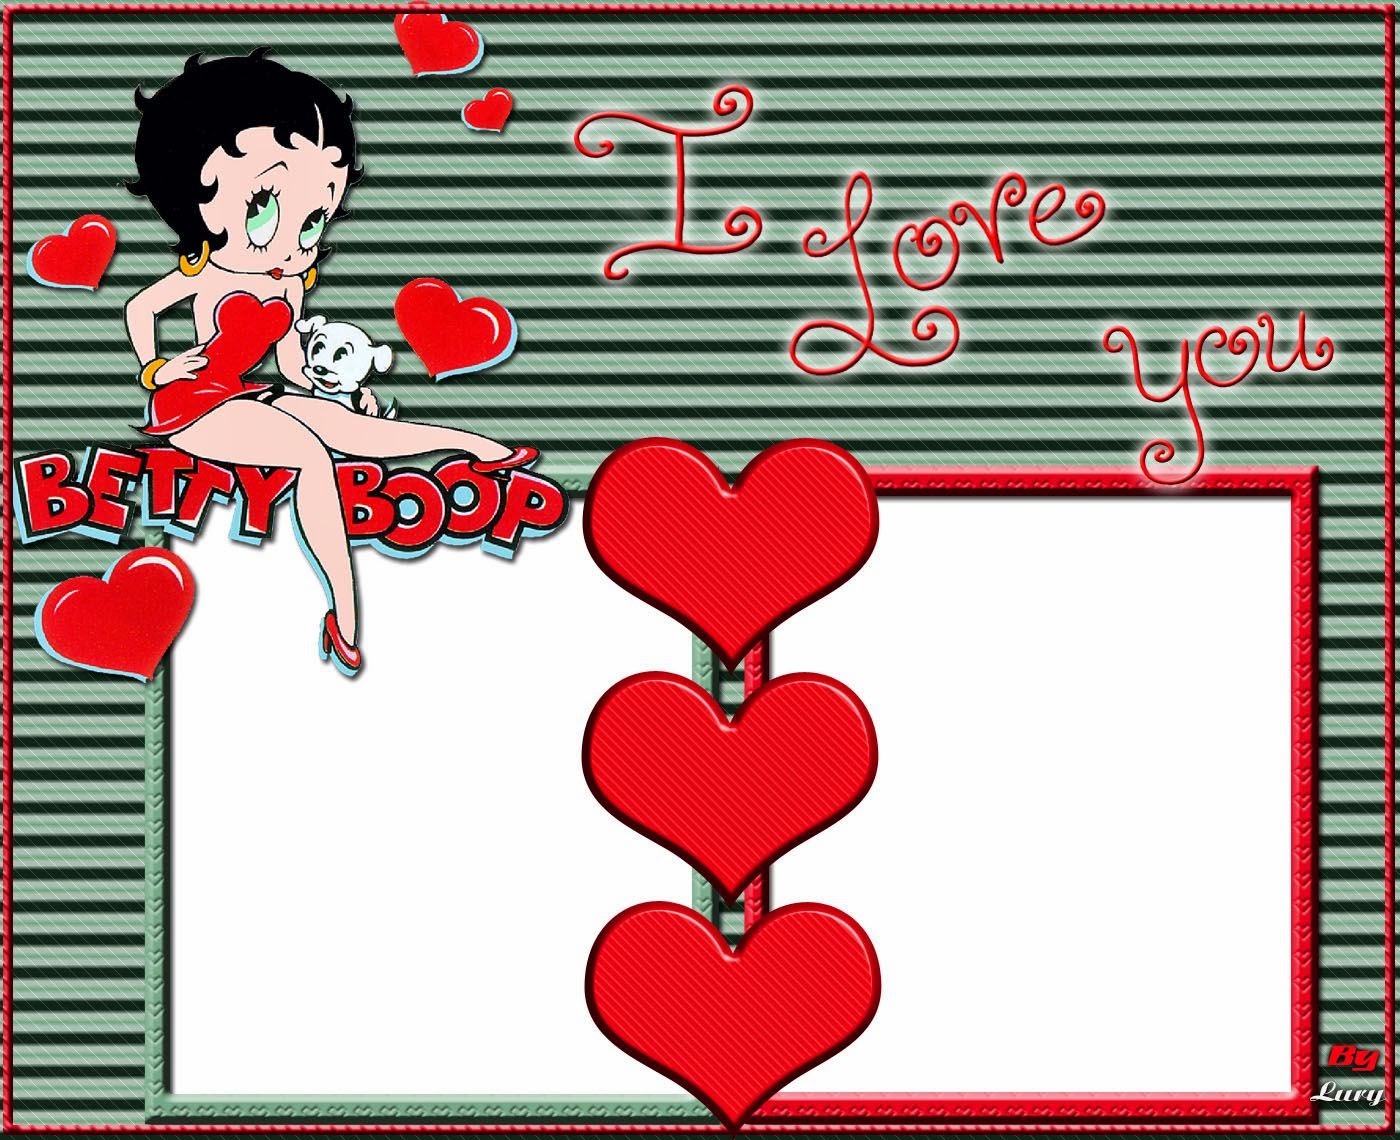 oh-my-fiesta-in-english-betty-boop-free-printable-cards-or